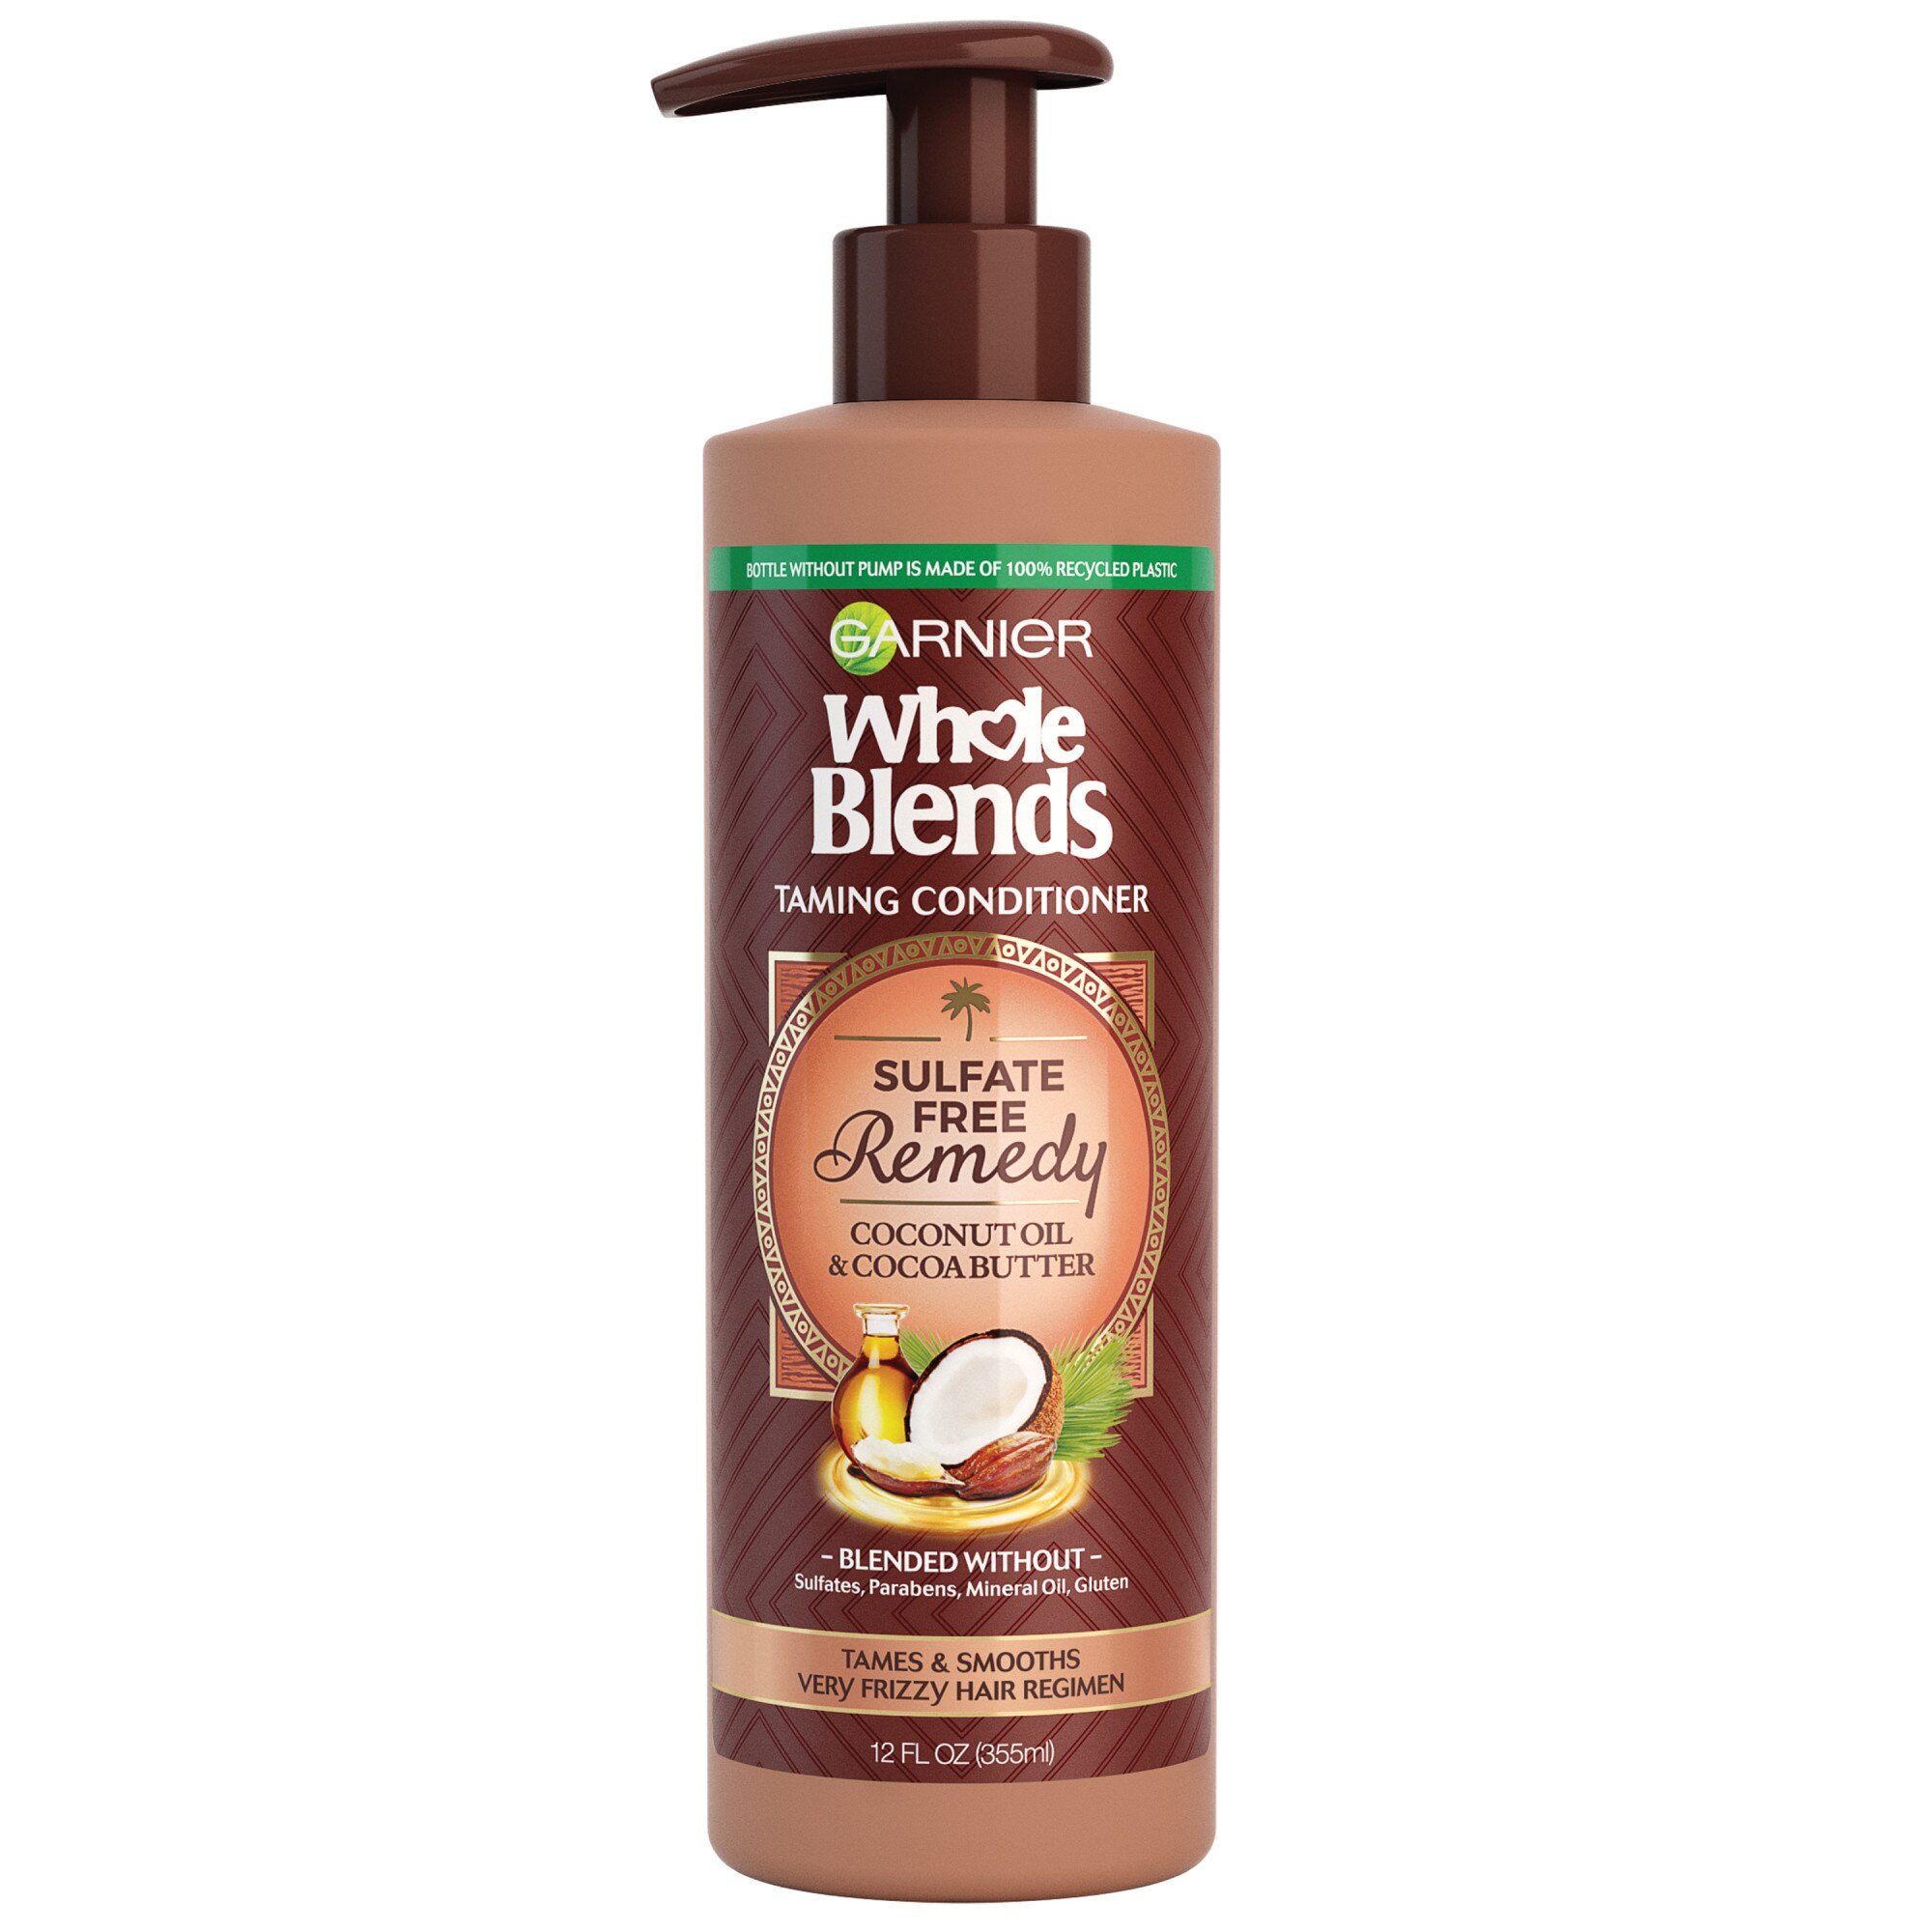 Garnier Whole Blends Remedy Coconut Oil & Cocoa Butter Taming Conditioner